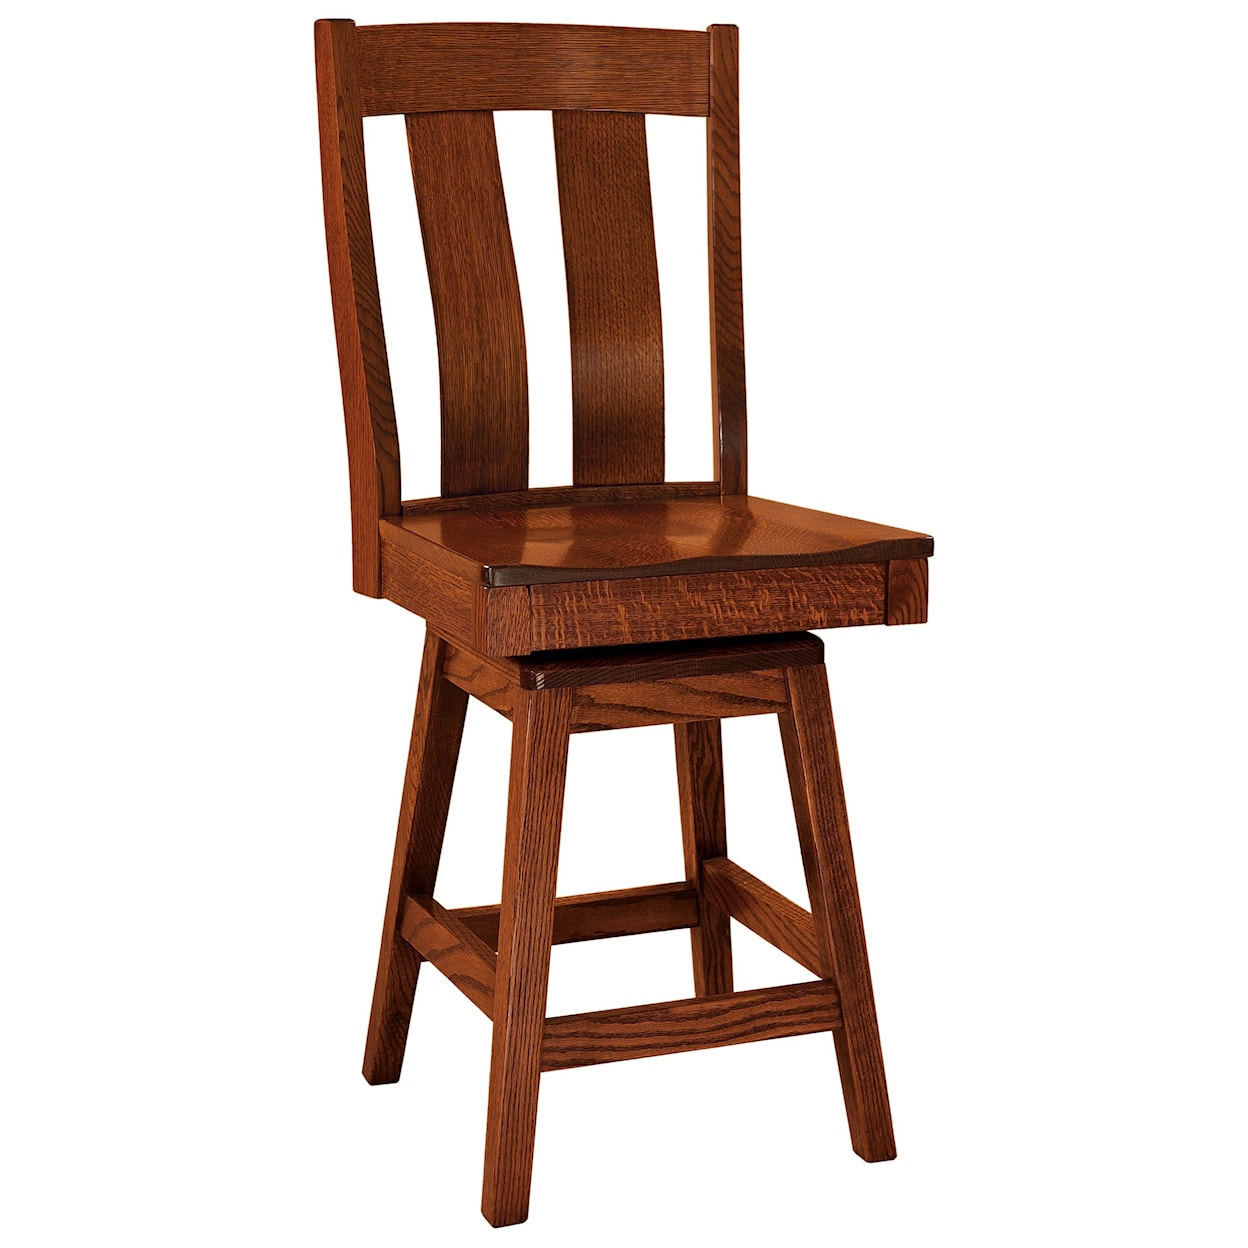 F&N Woodworking Laurie Swivel Counter Height Stool - Leather Seat